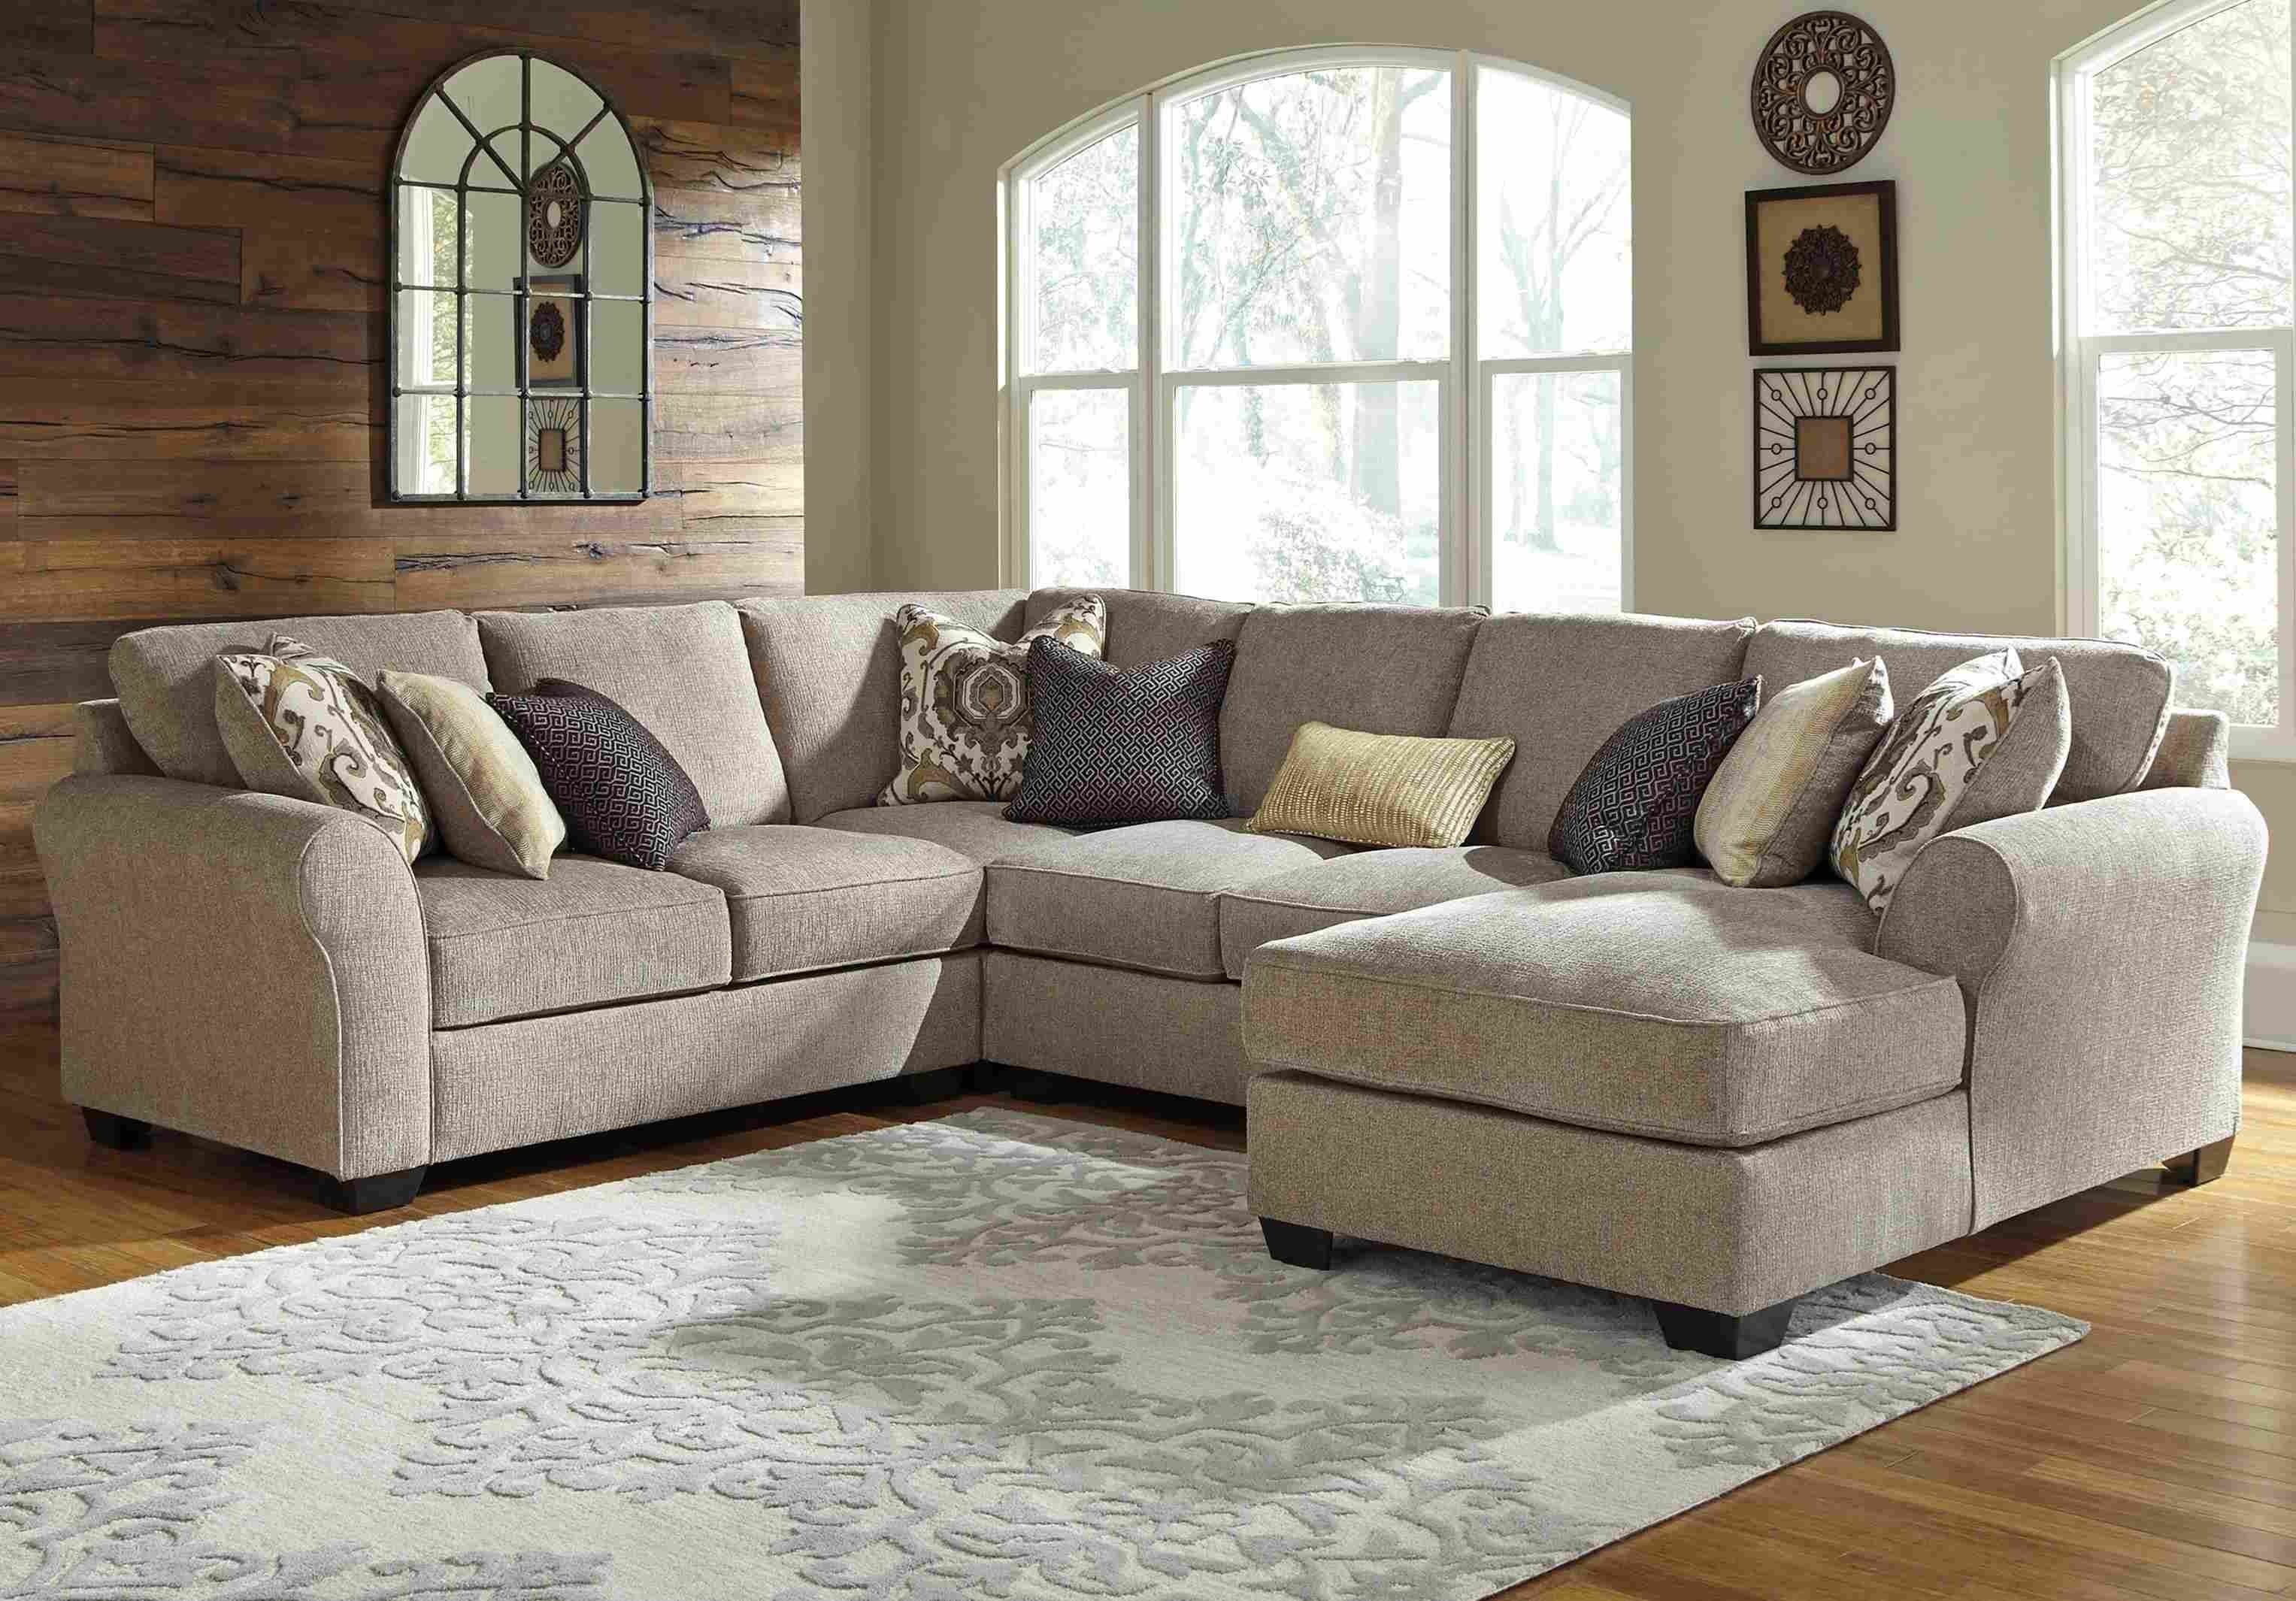 30 Best Collection Of Delano 2 Piece Sectionals With Laf Oversized Chaise